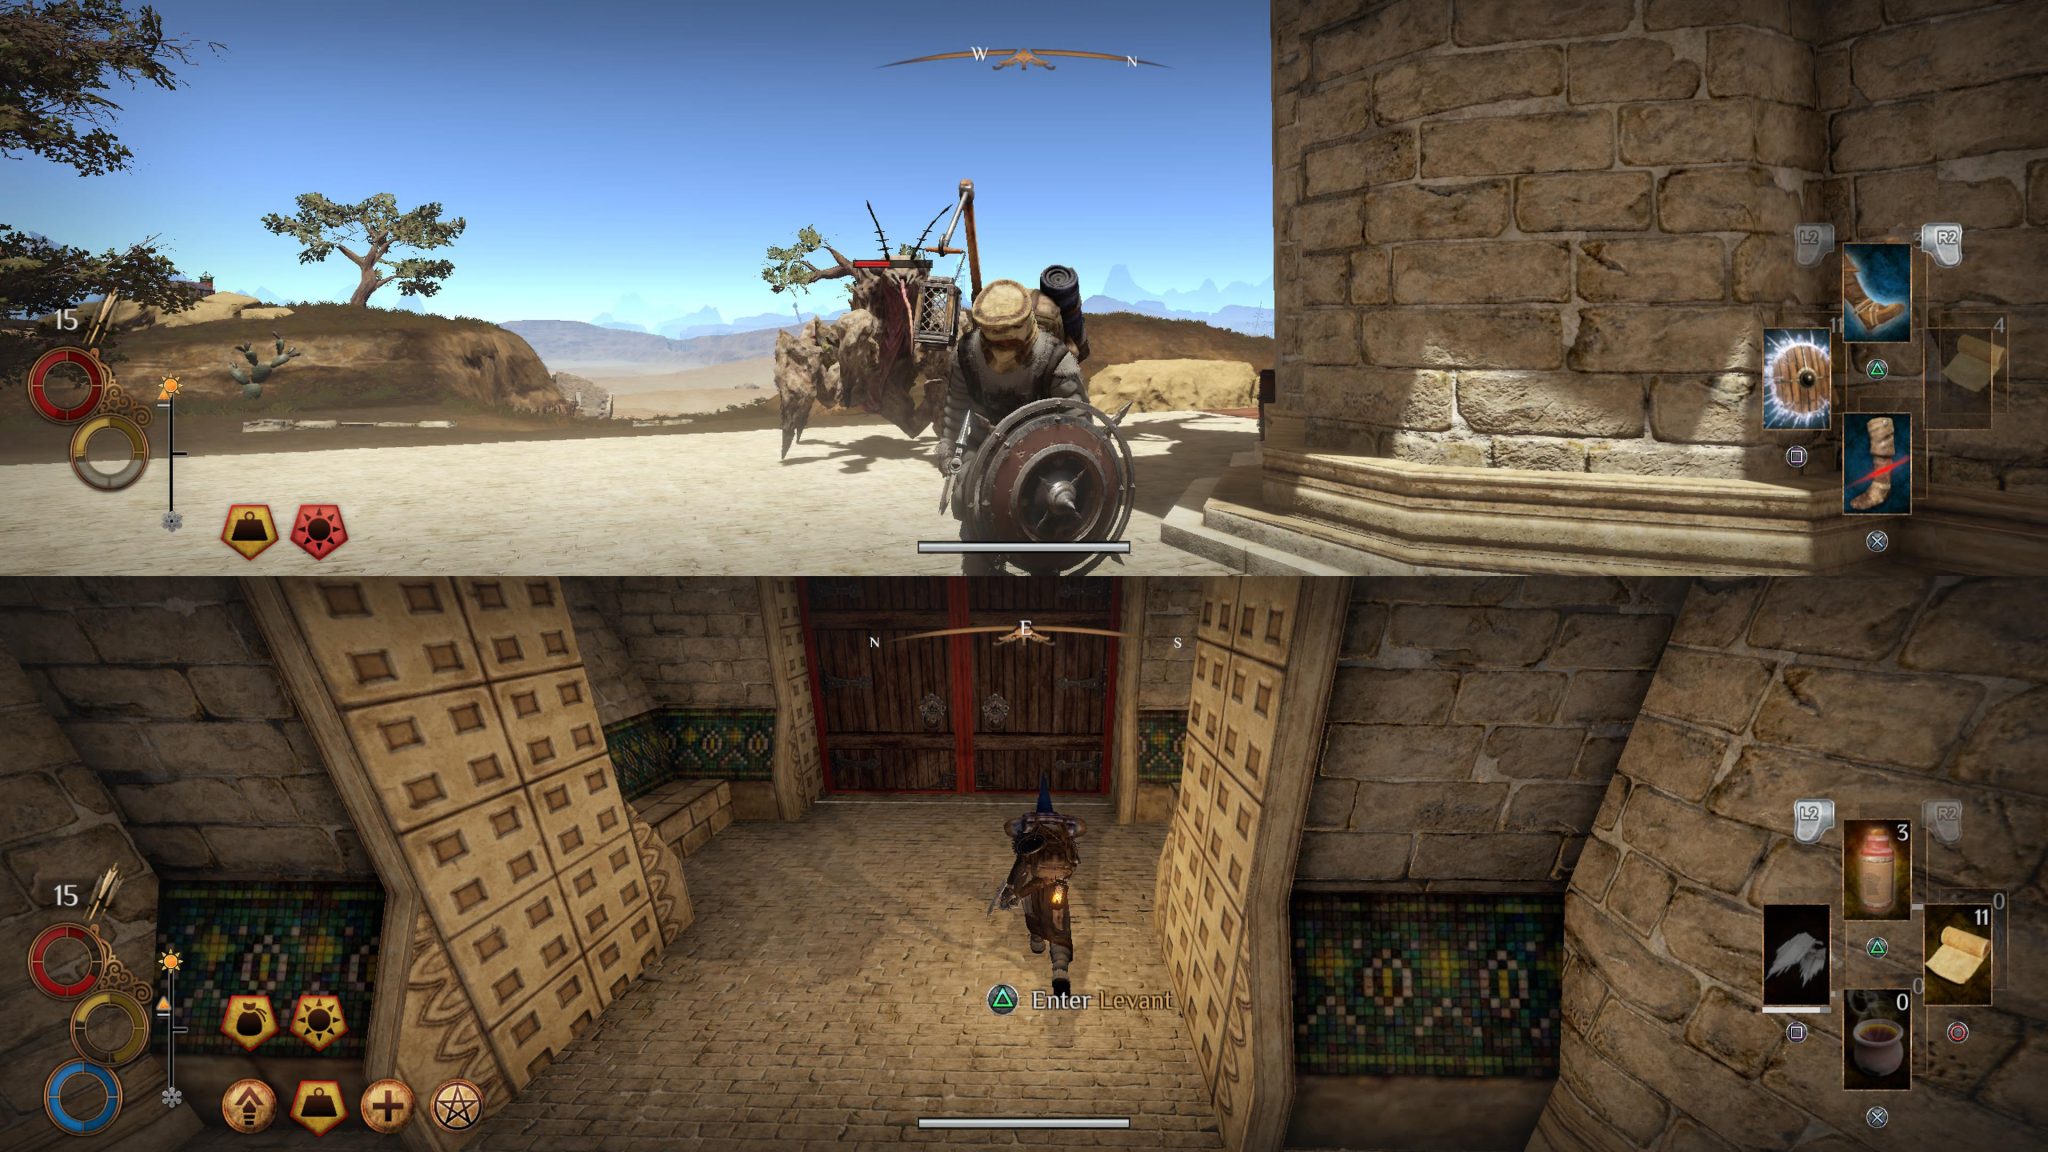 Outward Definitive Edition for mac download